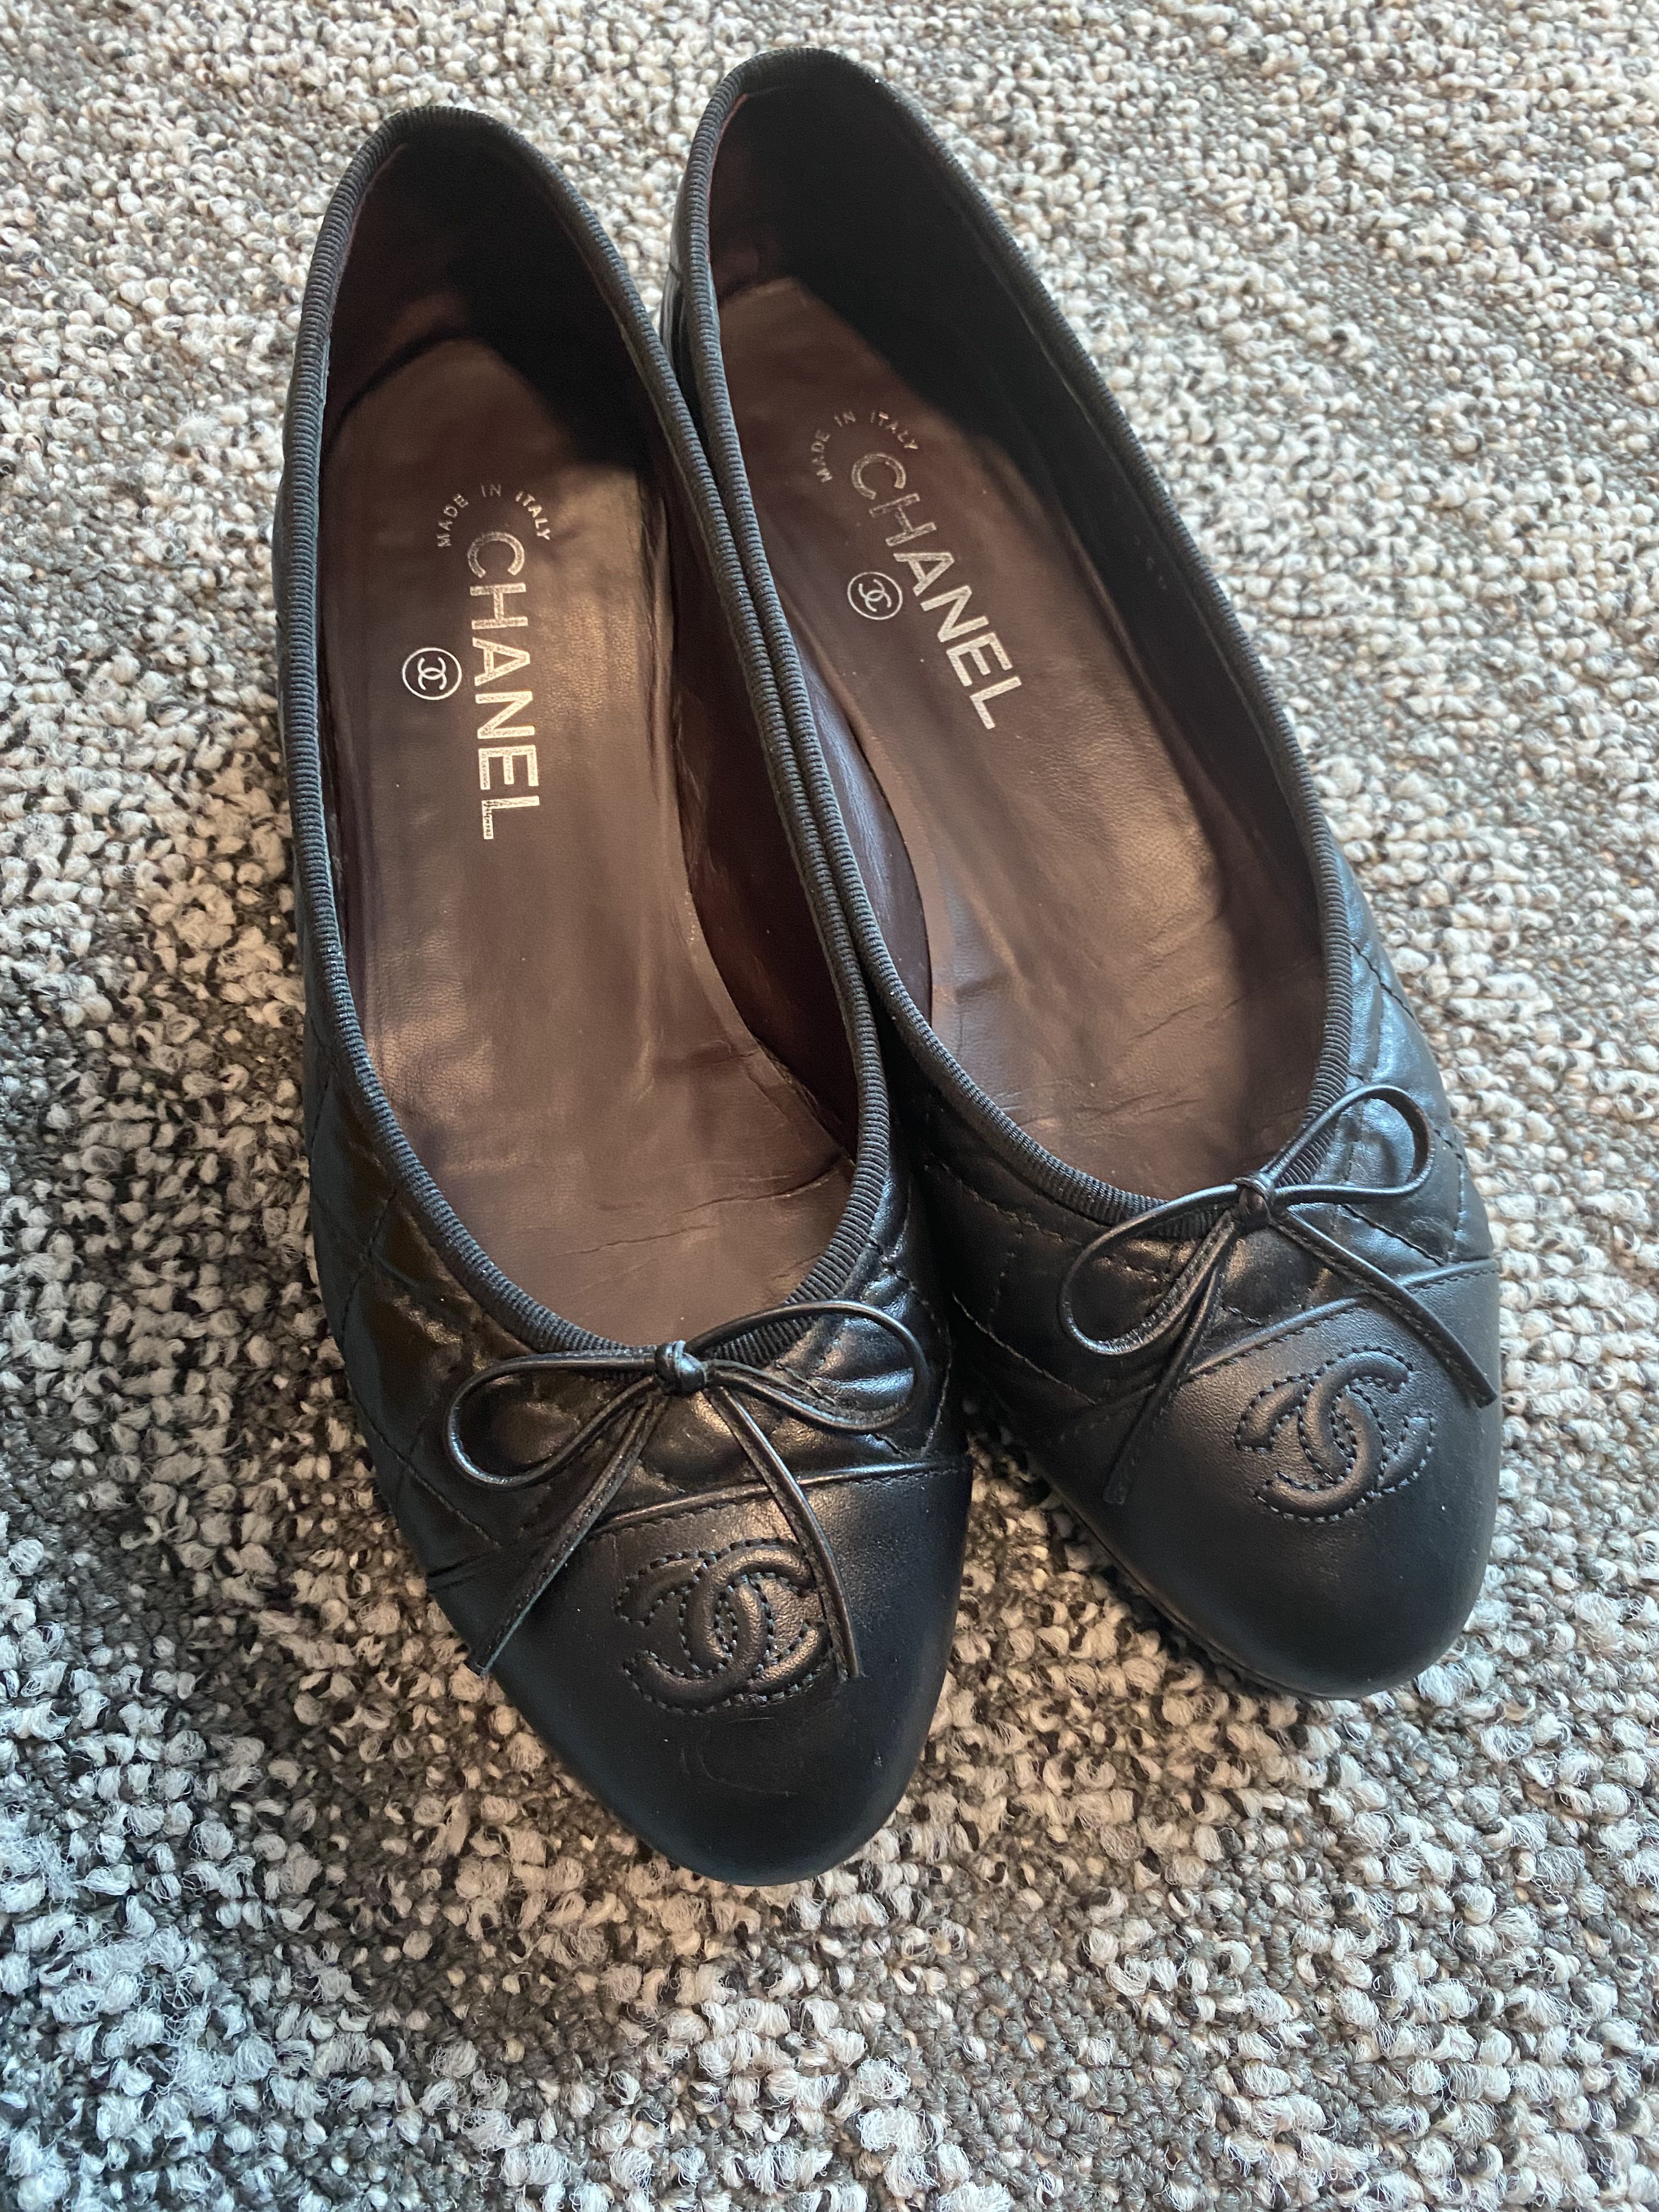 Authentic Chanel classic black calfskin leather ballerina flats size 39,  Women's Fashion, Footwear, Flats on Carousell